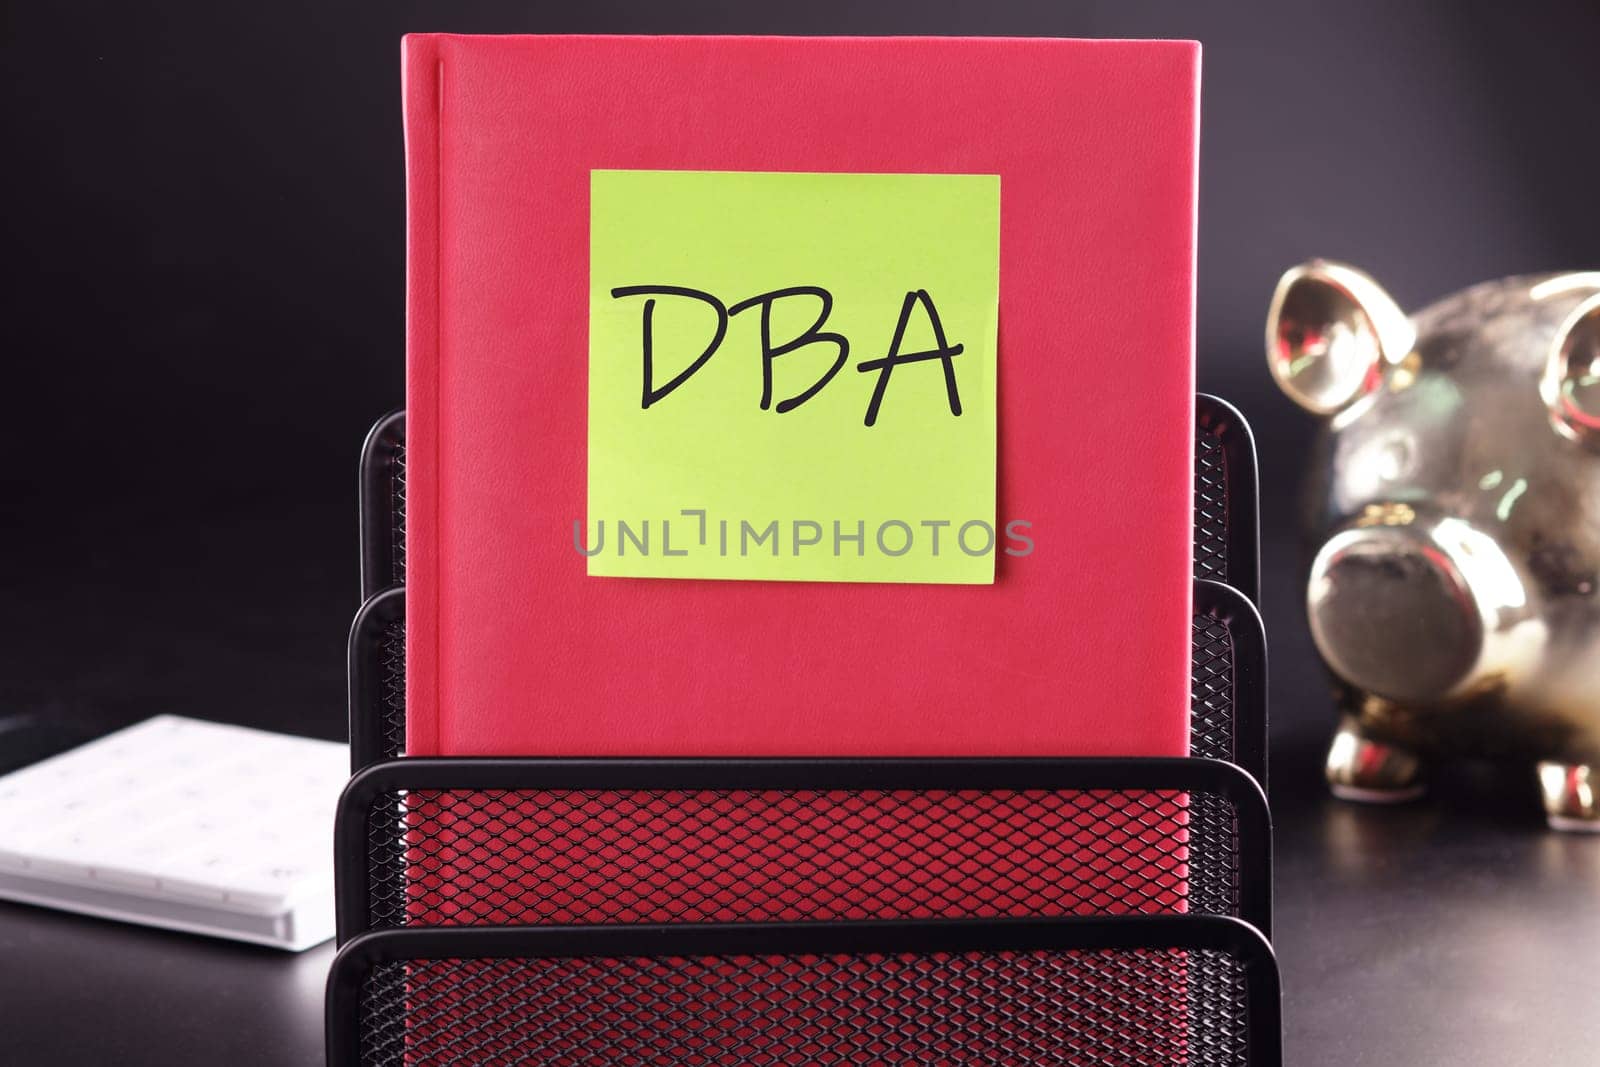 DBA text on a yellow sticker pasted on an upright diary on a black background